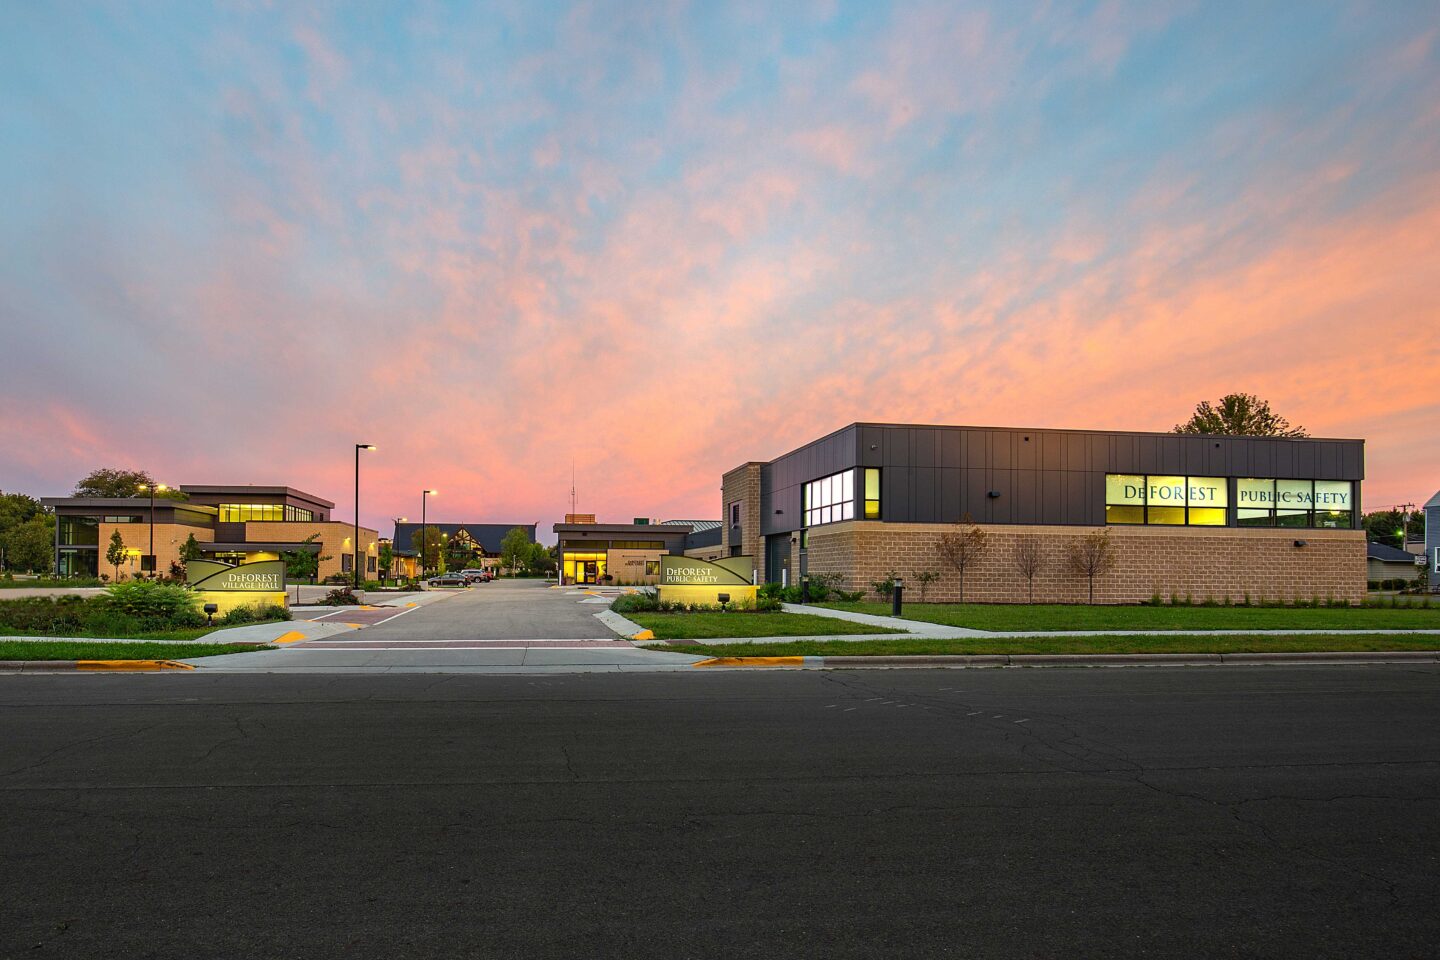 View at dusk from across the street of a public safety building and village hall complex in DeForest